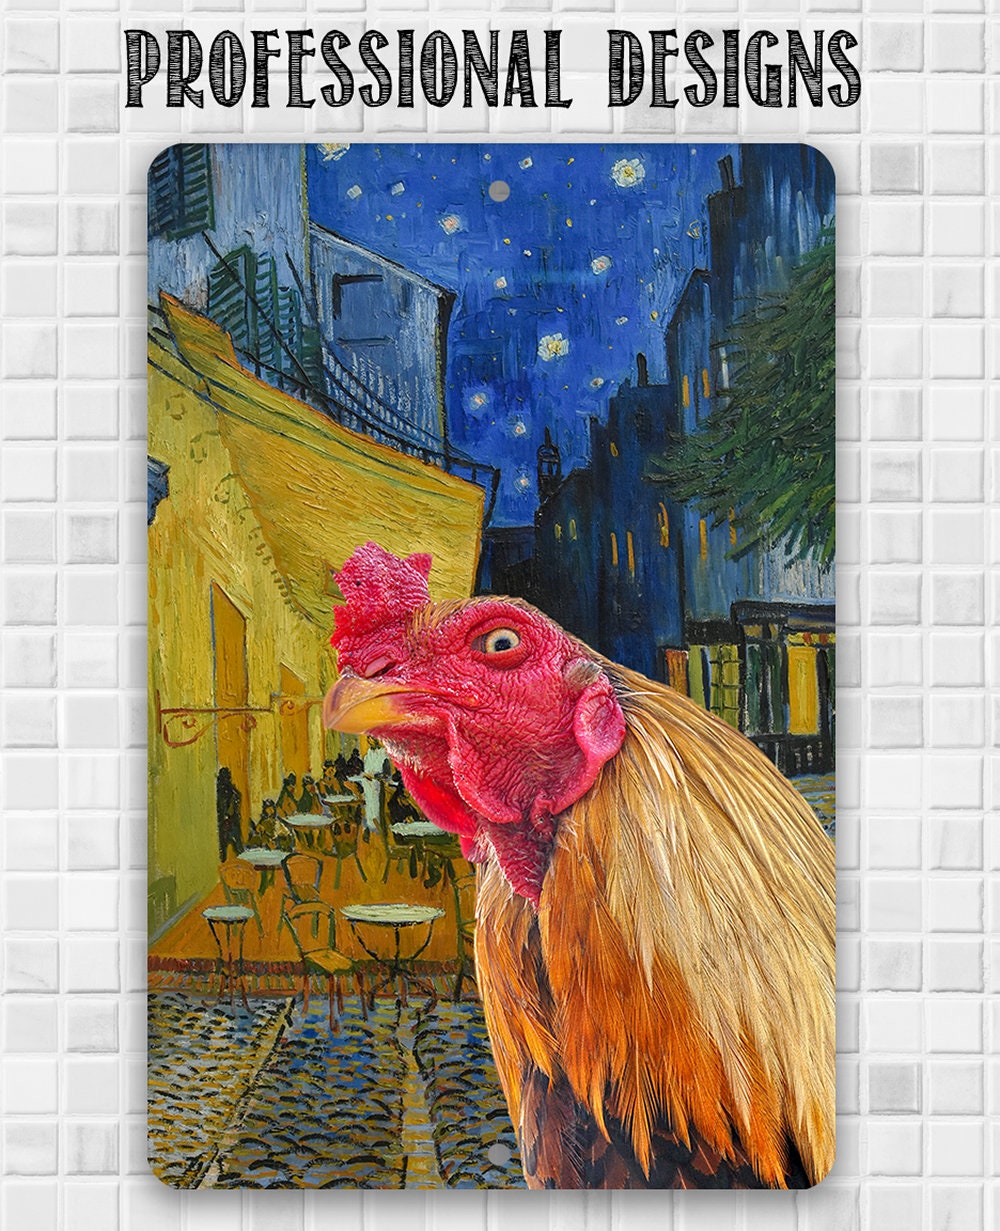 Café Terrace at Night Painting - Interrupted by Rooster - Metal Sign Metal Sign Lone Star Art 